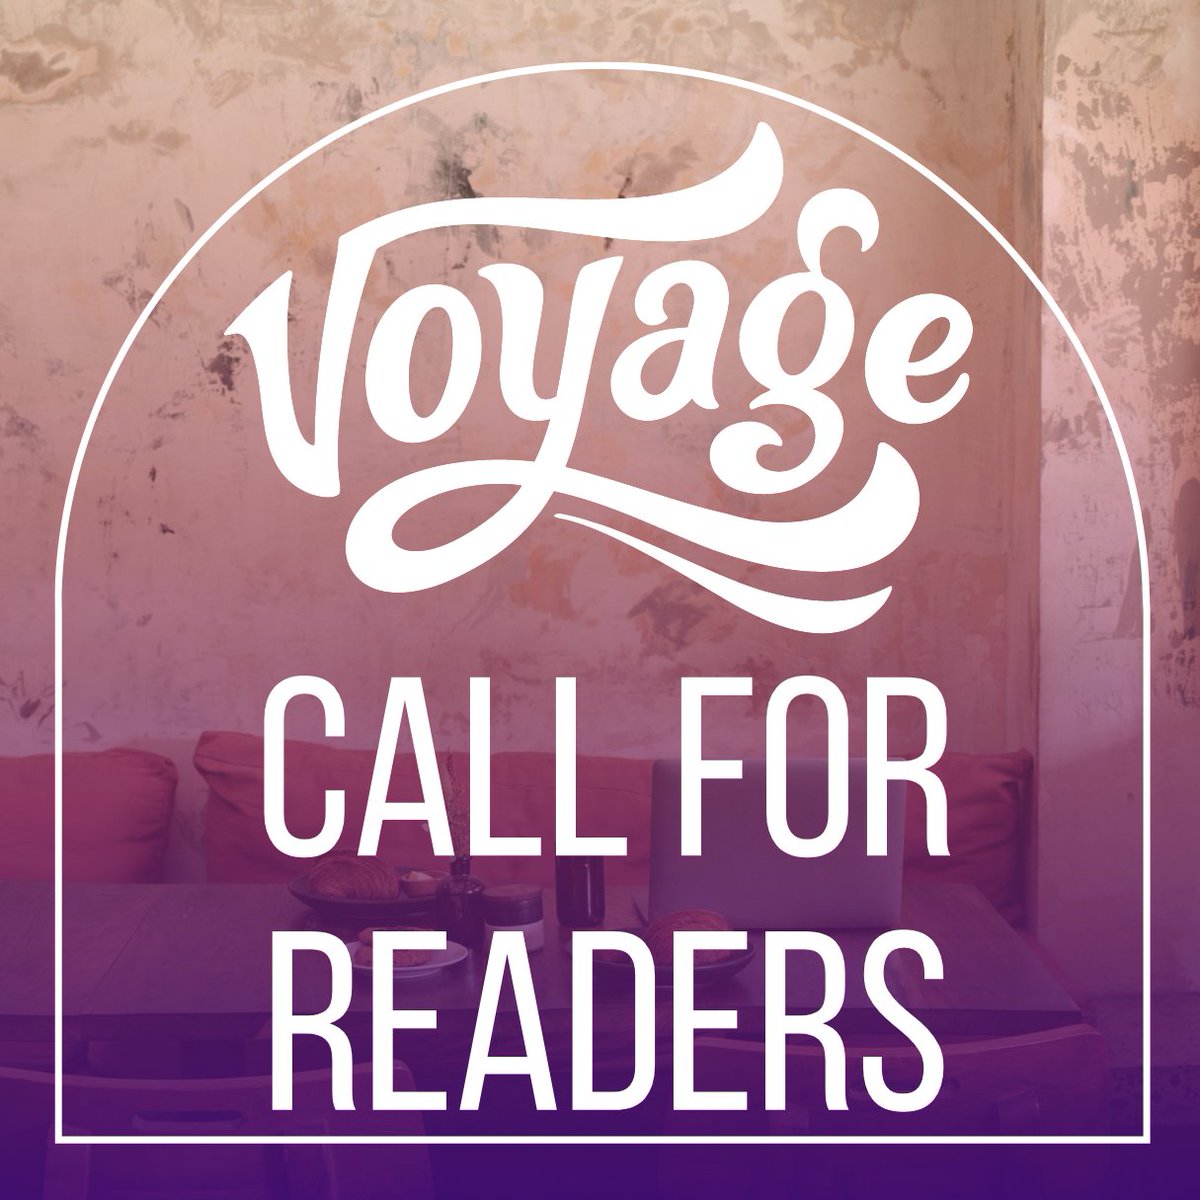 We're looking for more readers to join our team! This is a volunteer position and involves a commitment of at least six months. Readers should have a keen eye for quality young adult fiction, creative nonfiction, and poetry. Apply here: uncharted.submittable.com/submit/262823/…